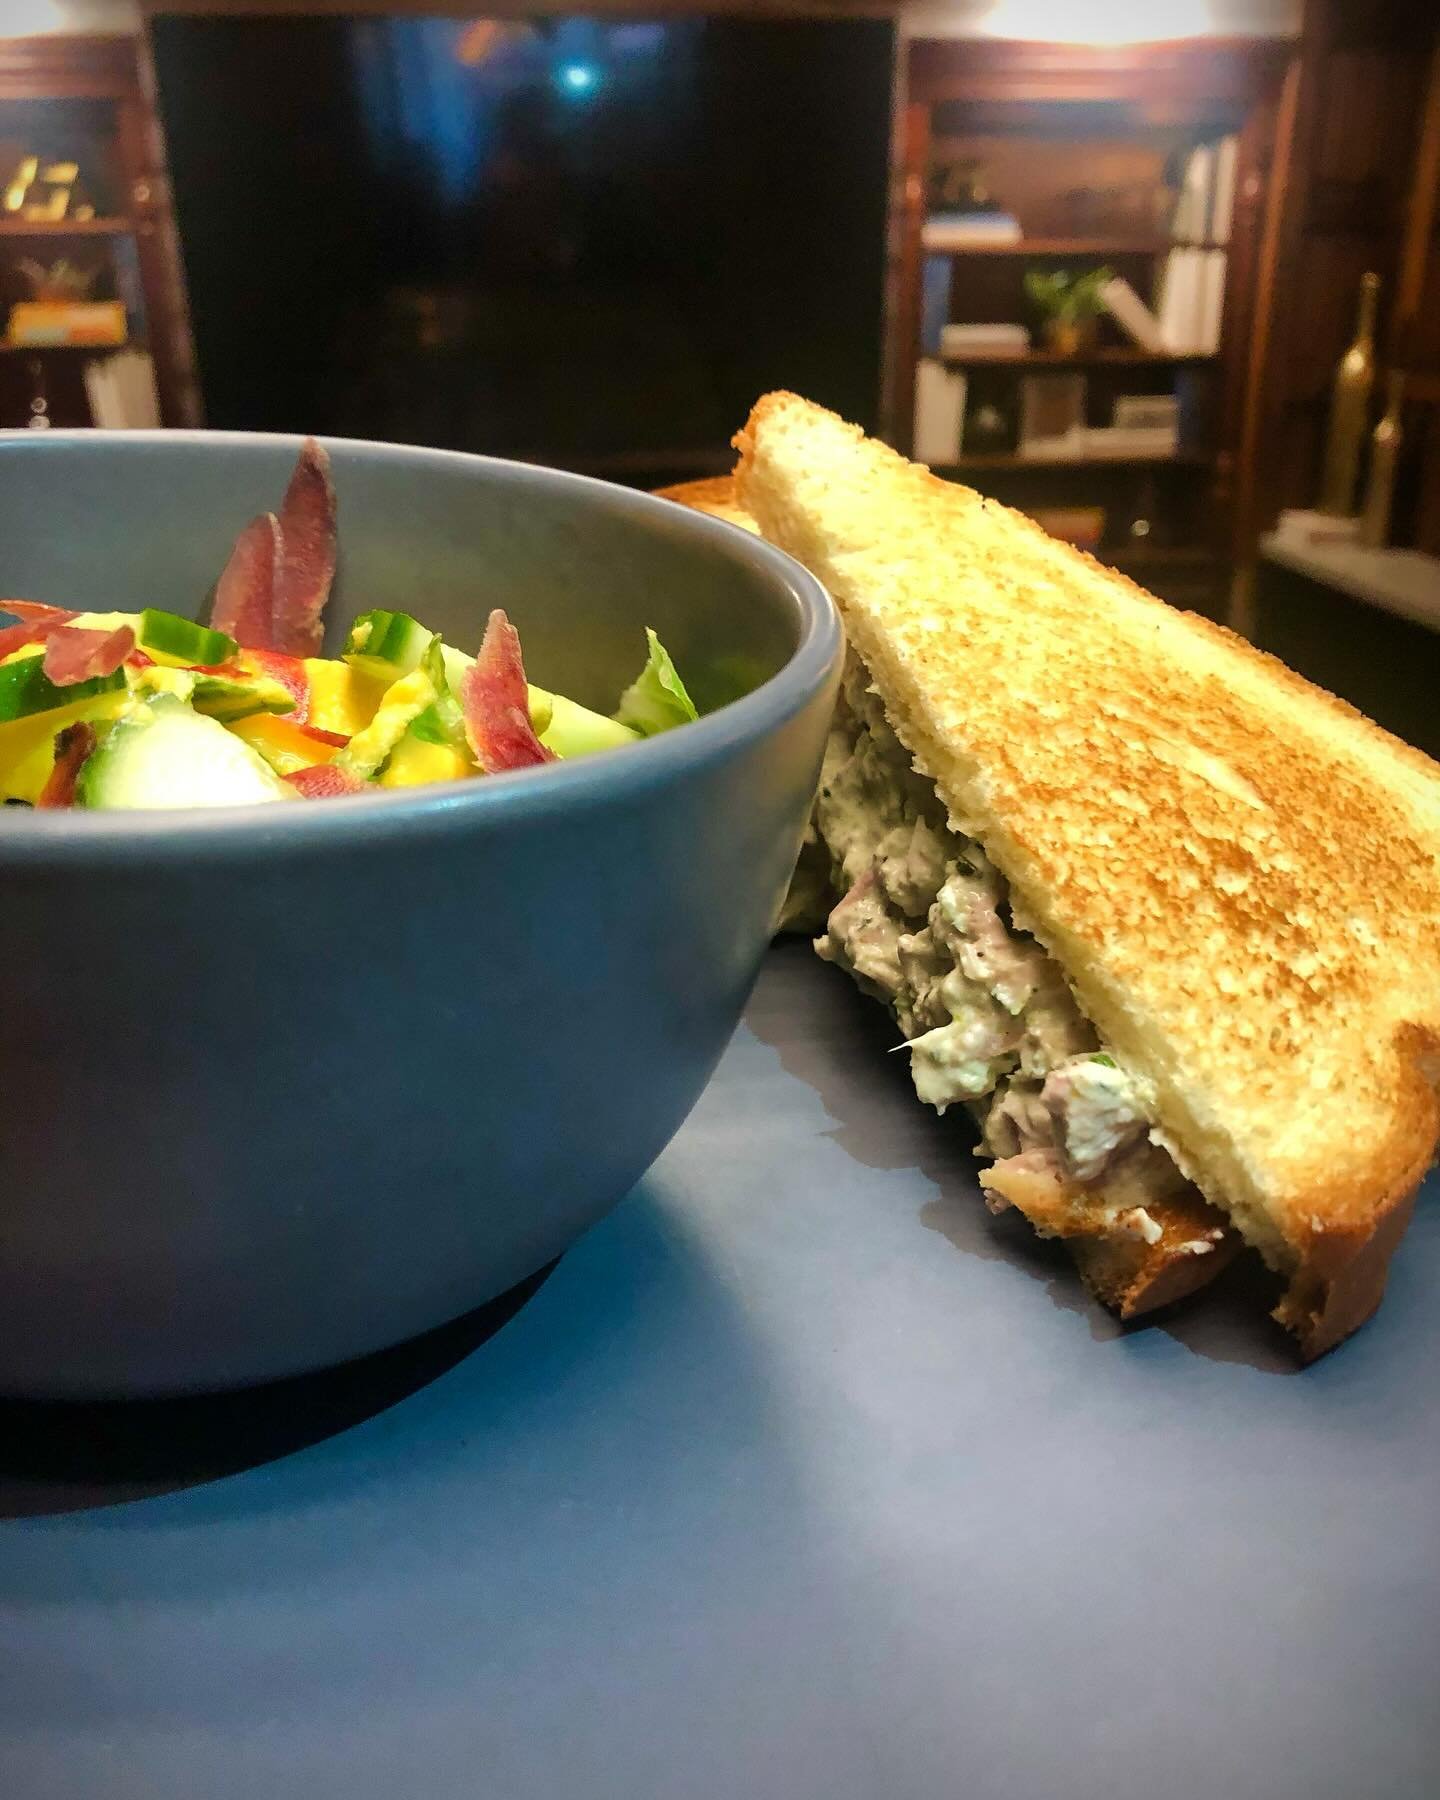 Lunch special!! ✨
Basil chicken salad sandwich on toasted sourdough! Try with a side of fries or side salad to complete your meal.